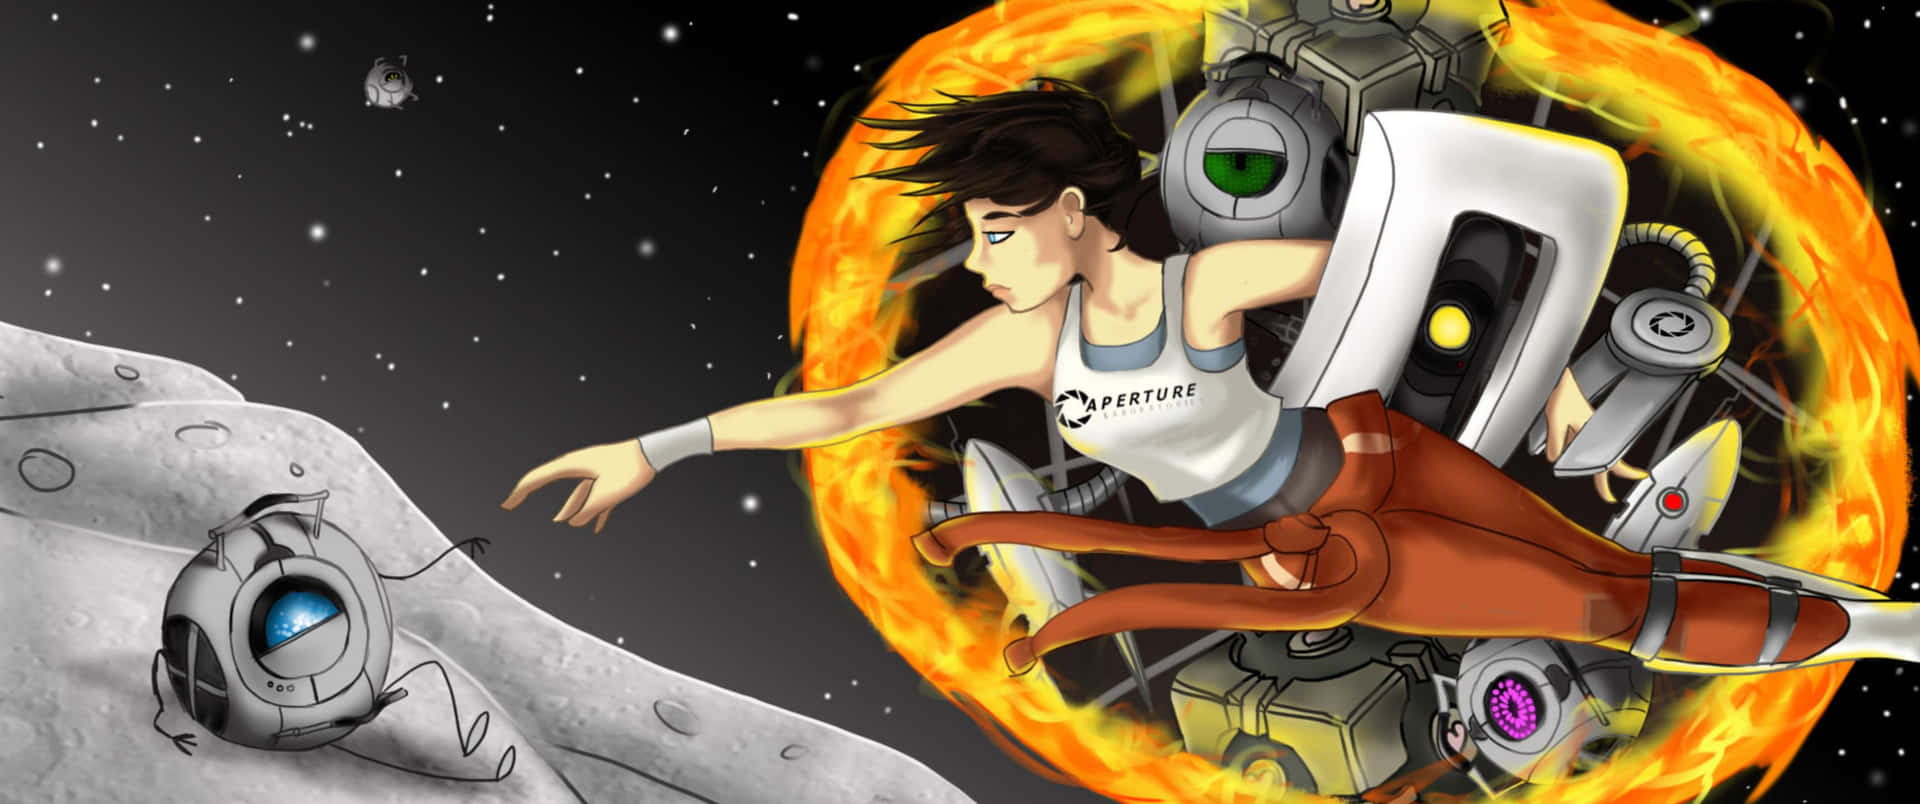 A Girl Is Flying In Space With A Robot